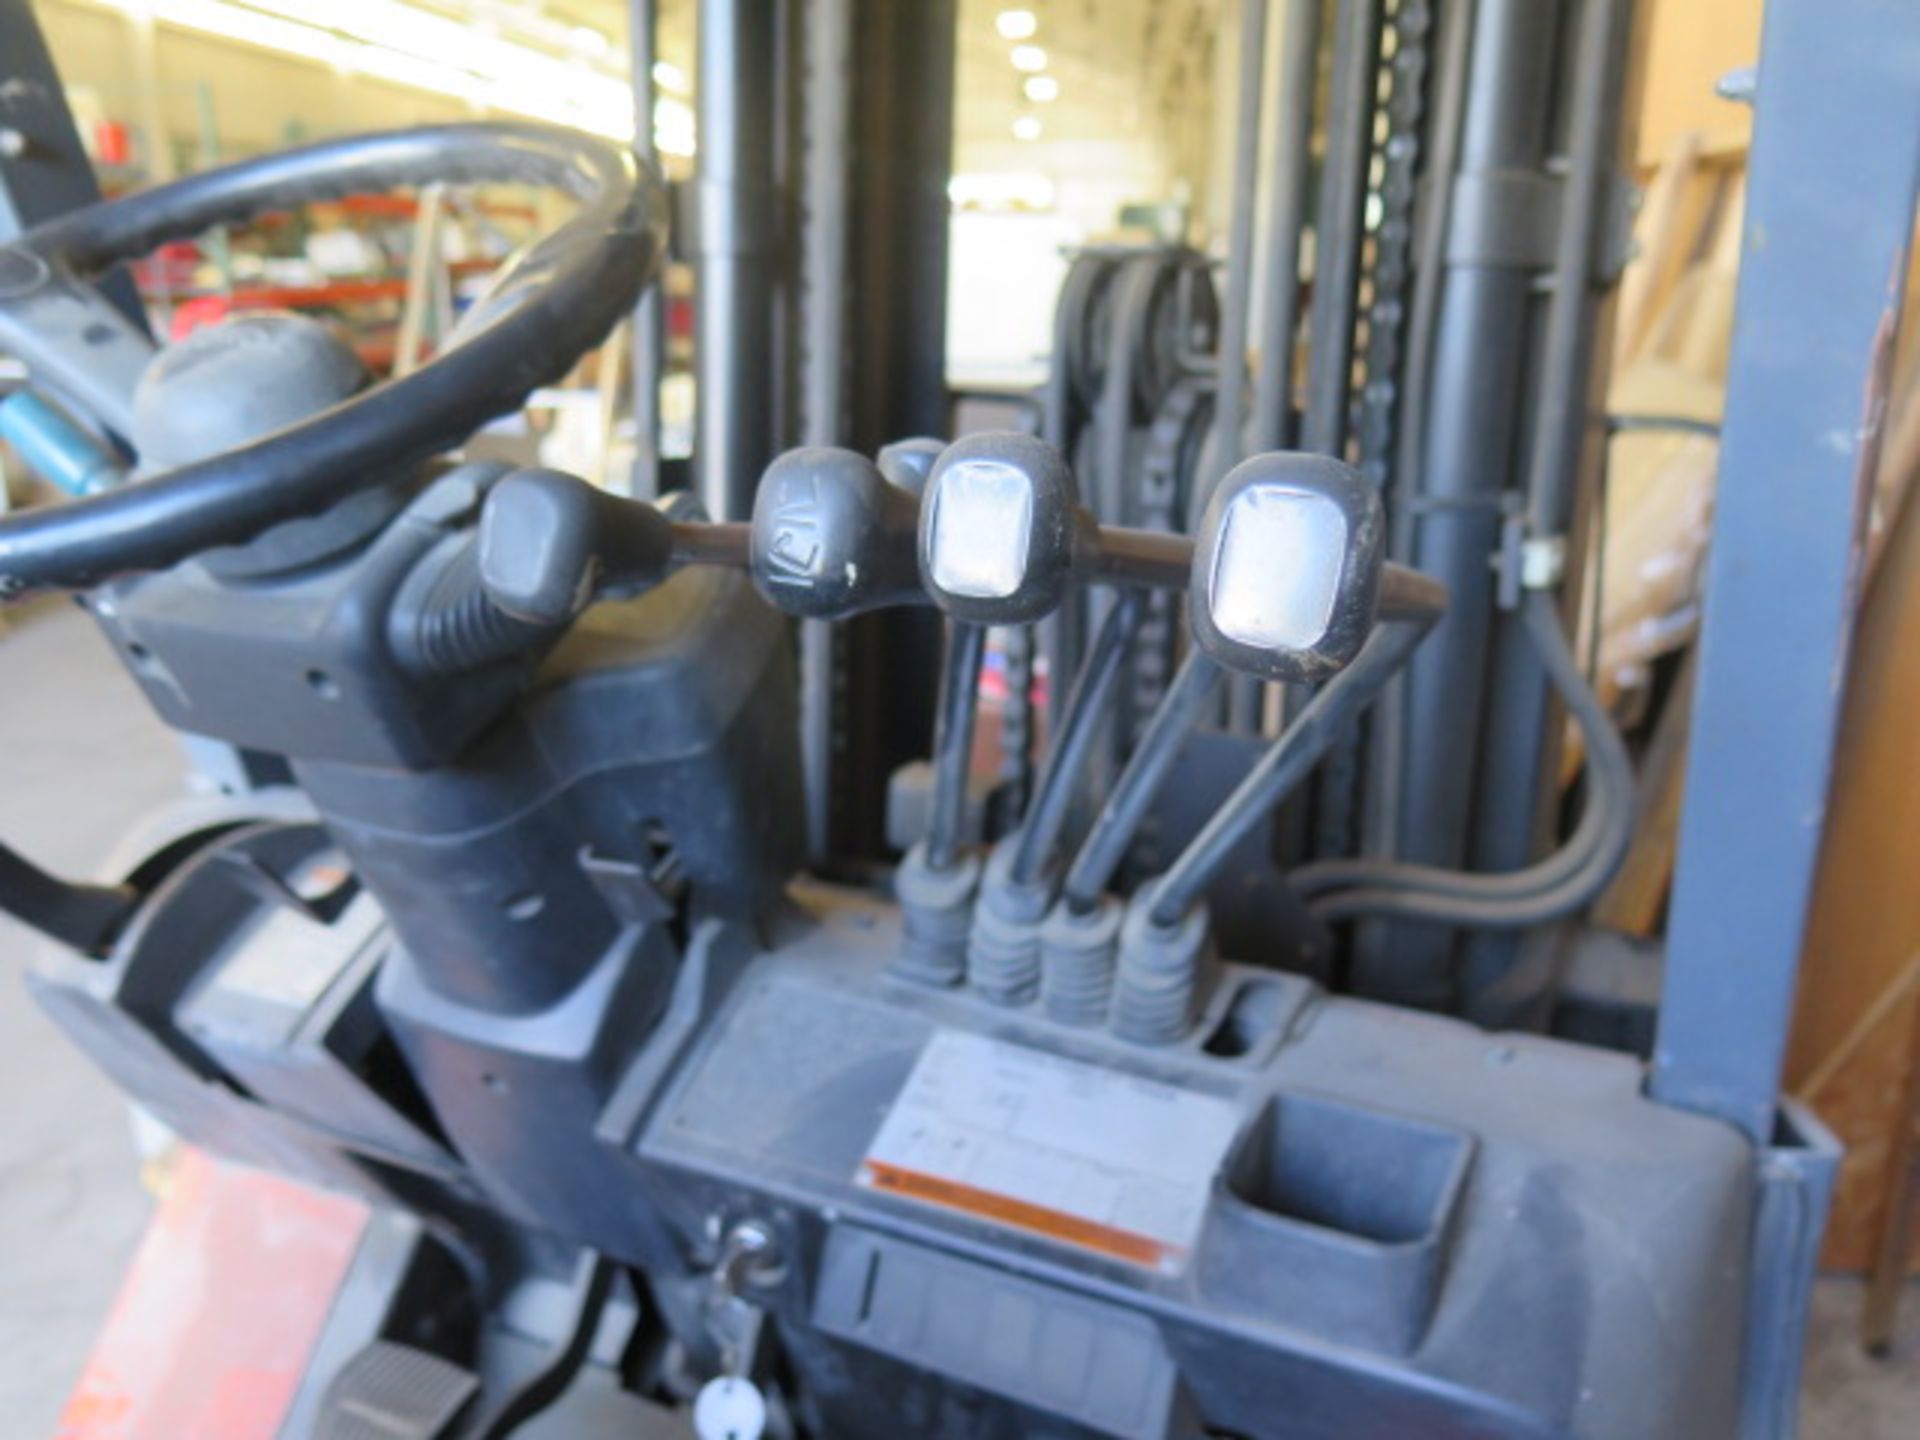 Toyota 7FGCU30 4750 Lb Cap LPG Forklift s/n 60080 w/ 3-Stage Mast, 188” Lift, Side Shift, SOLD AS IS - Image 8 of 13